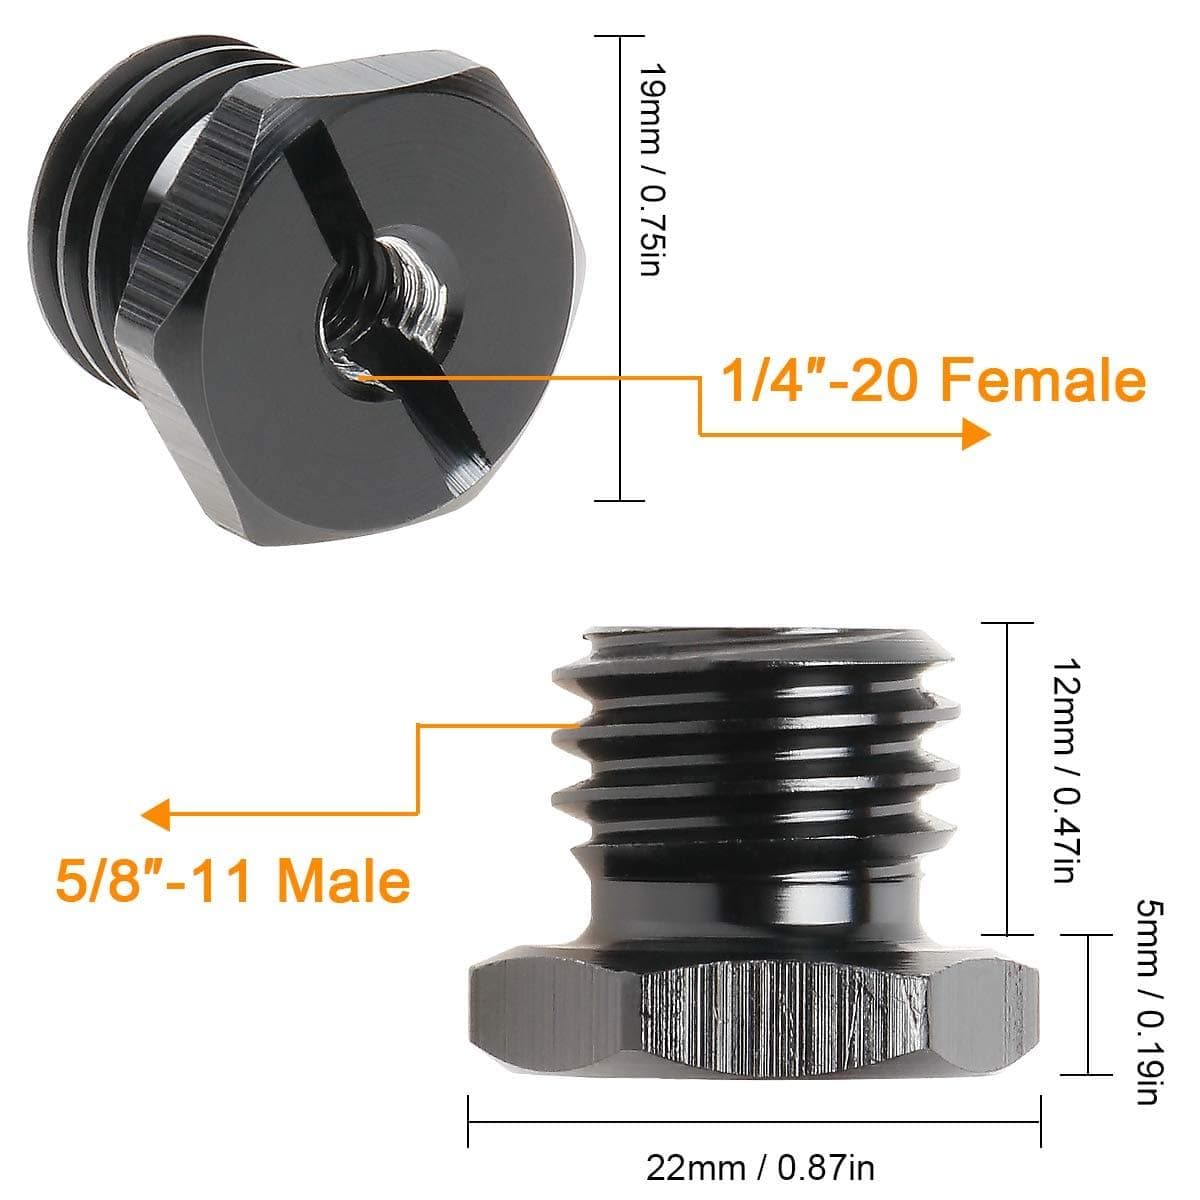 HUEPAR Adapter with 1/4 inch to 5/8 inch thread conversion for tripods and laser levels with free shipping in the US4